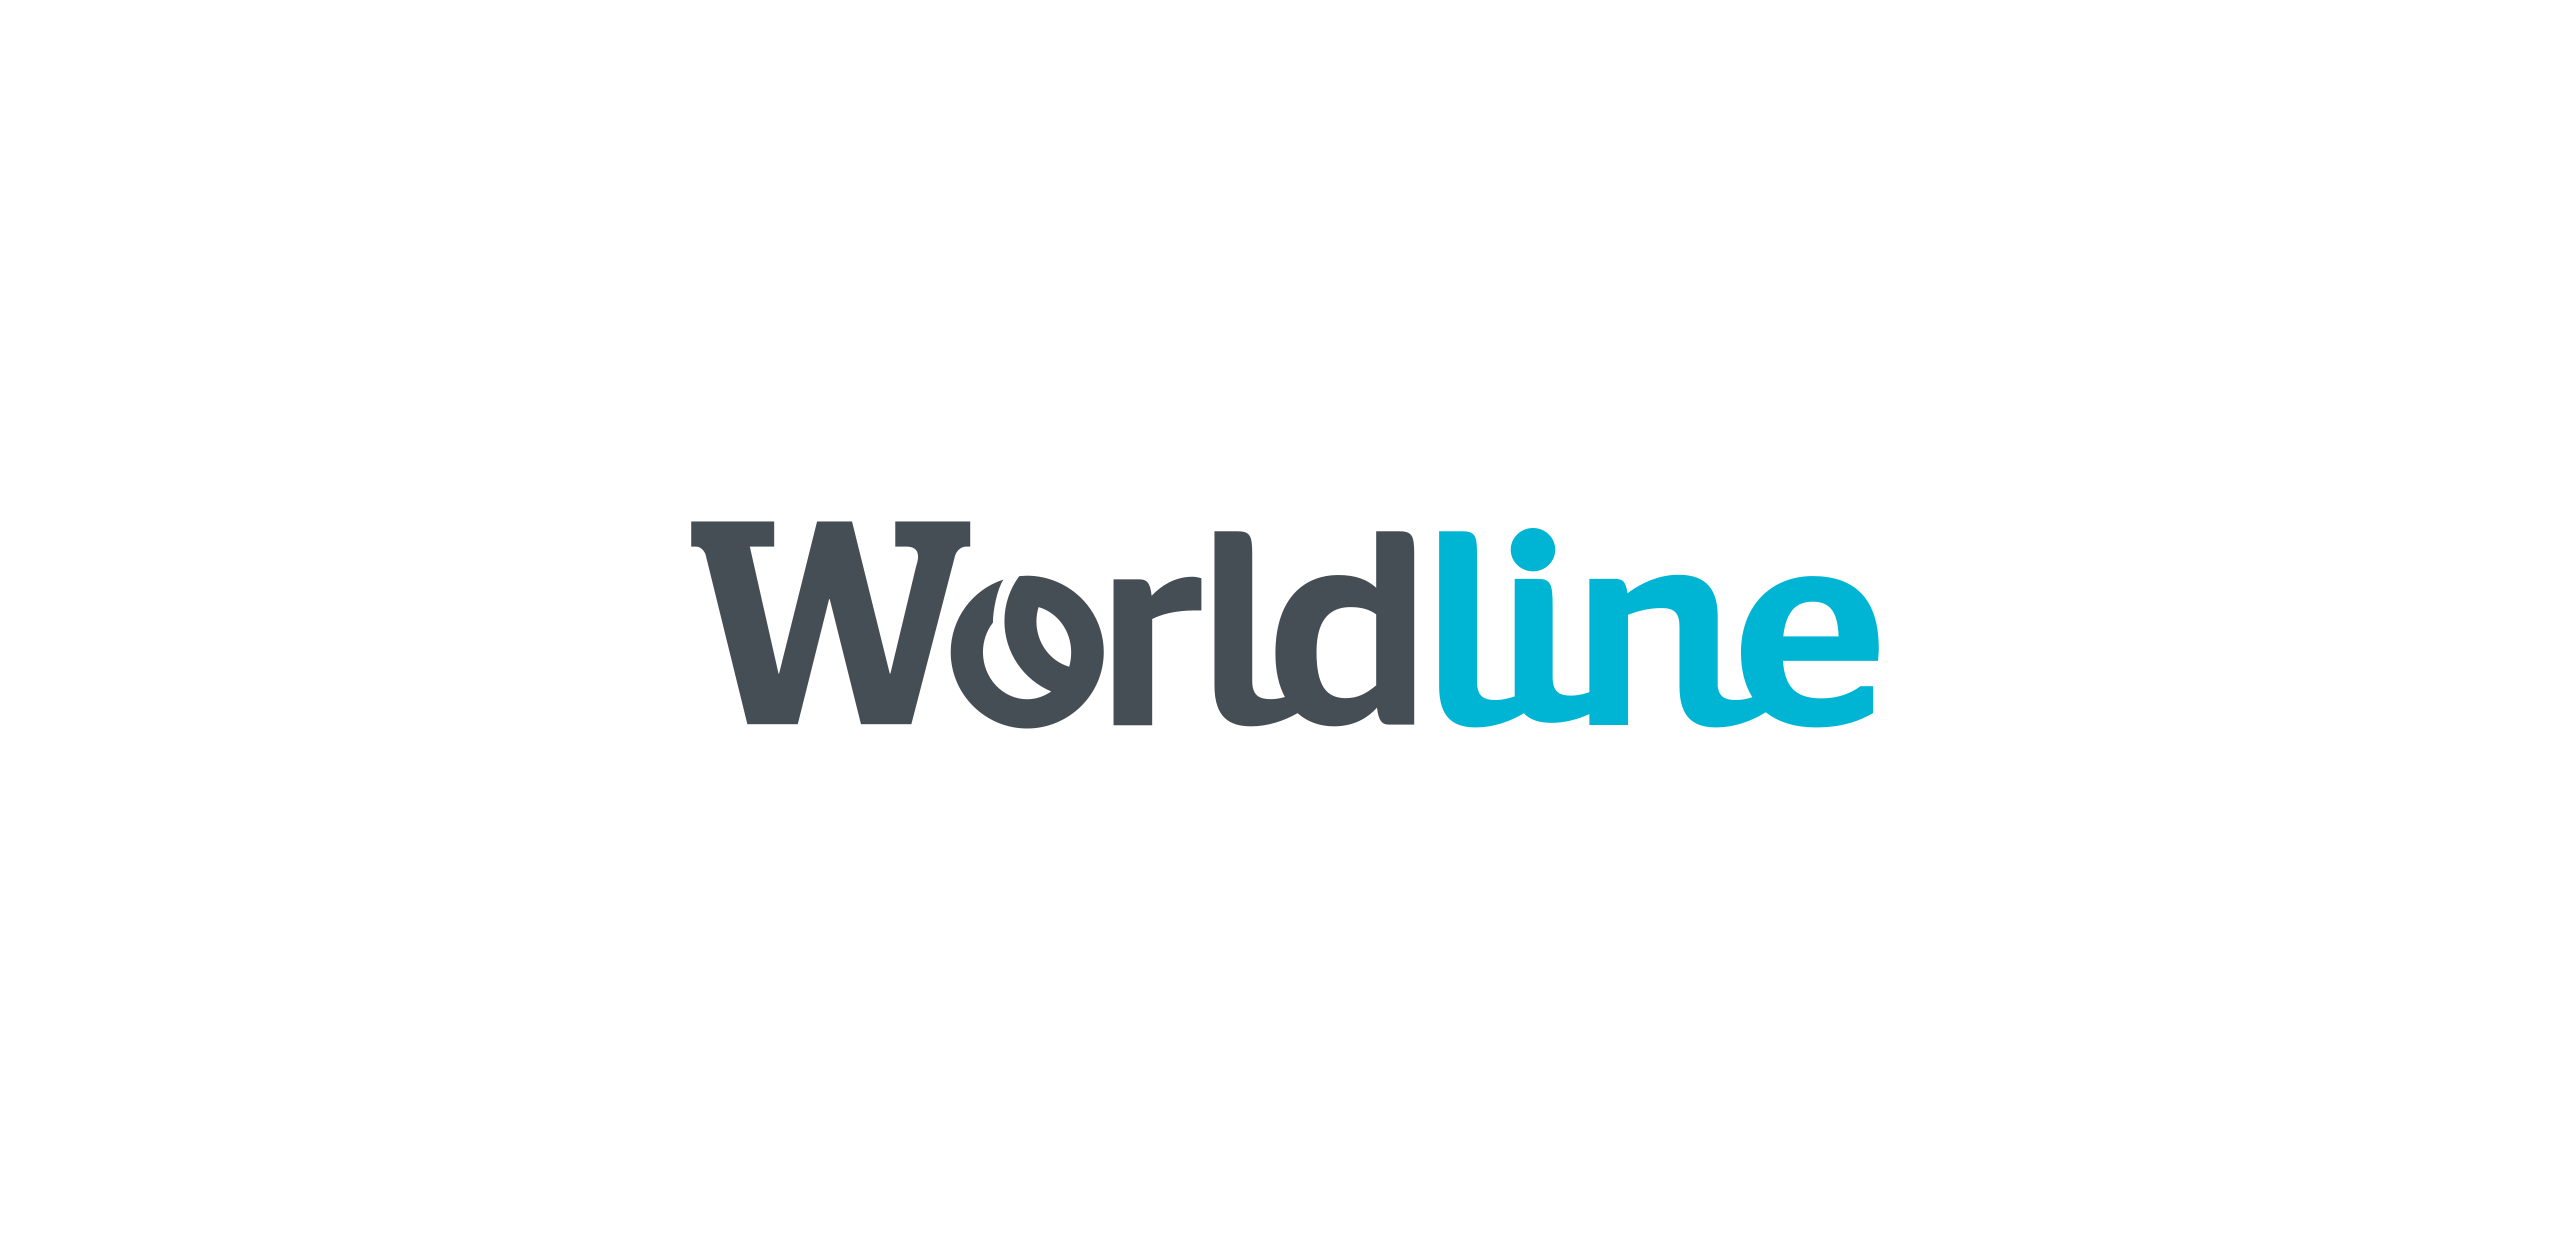 Worldline to Partner with Luminor to Operate and Upgrade its ATM Network